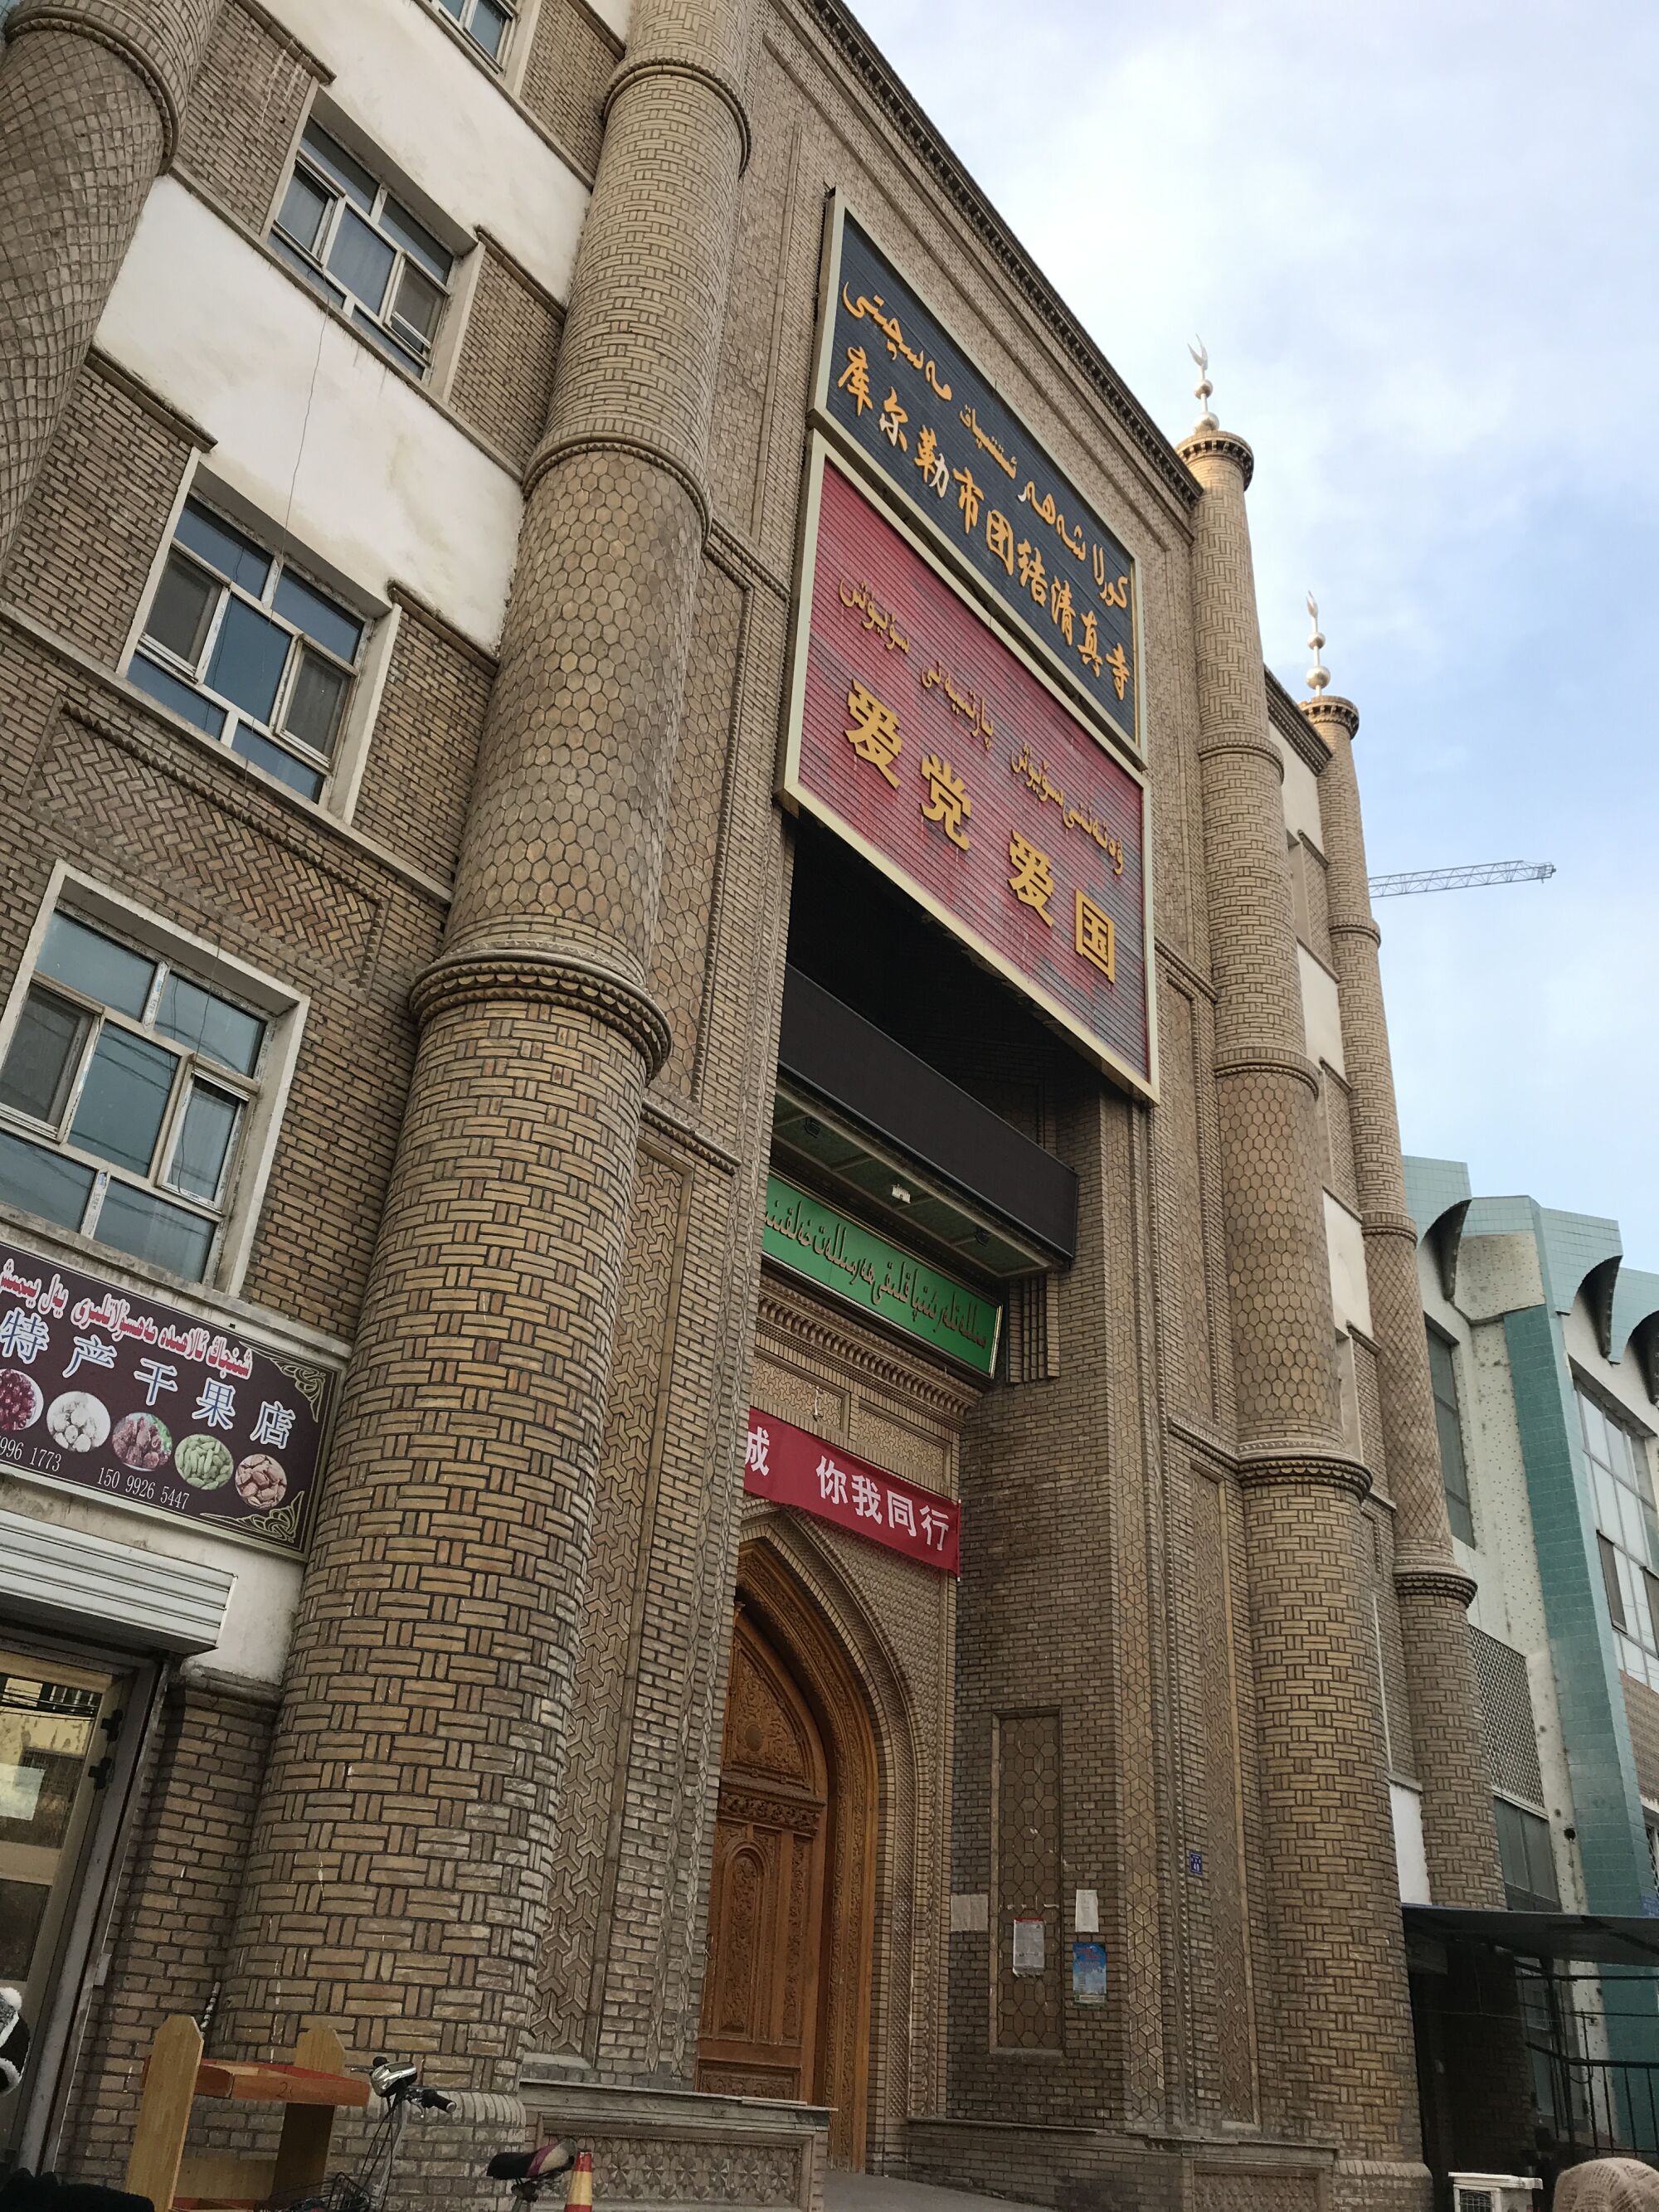 Many mosques in Korla, Xinjiang, have been destroyed, but The Times saw one left standing.